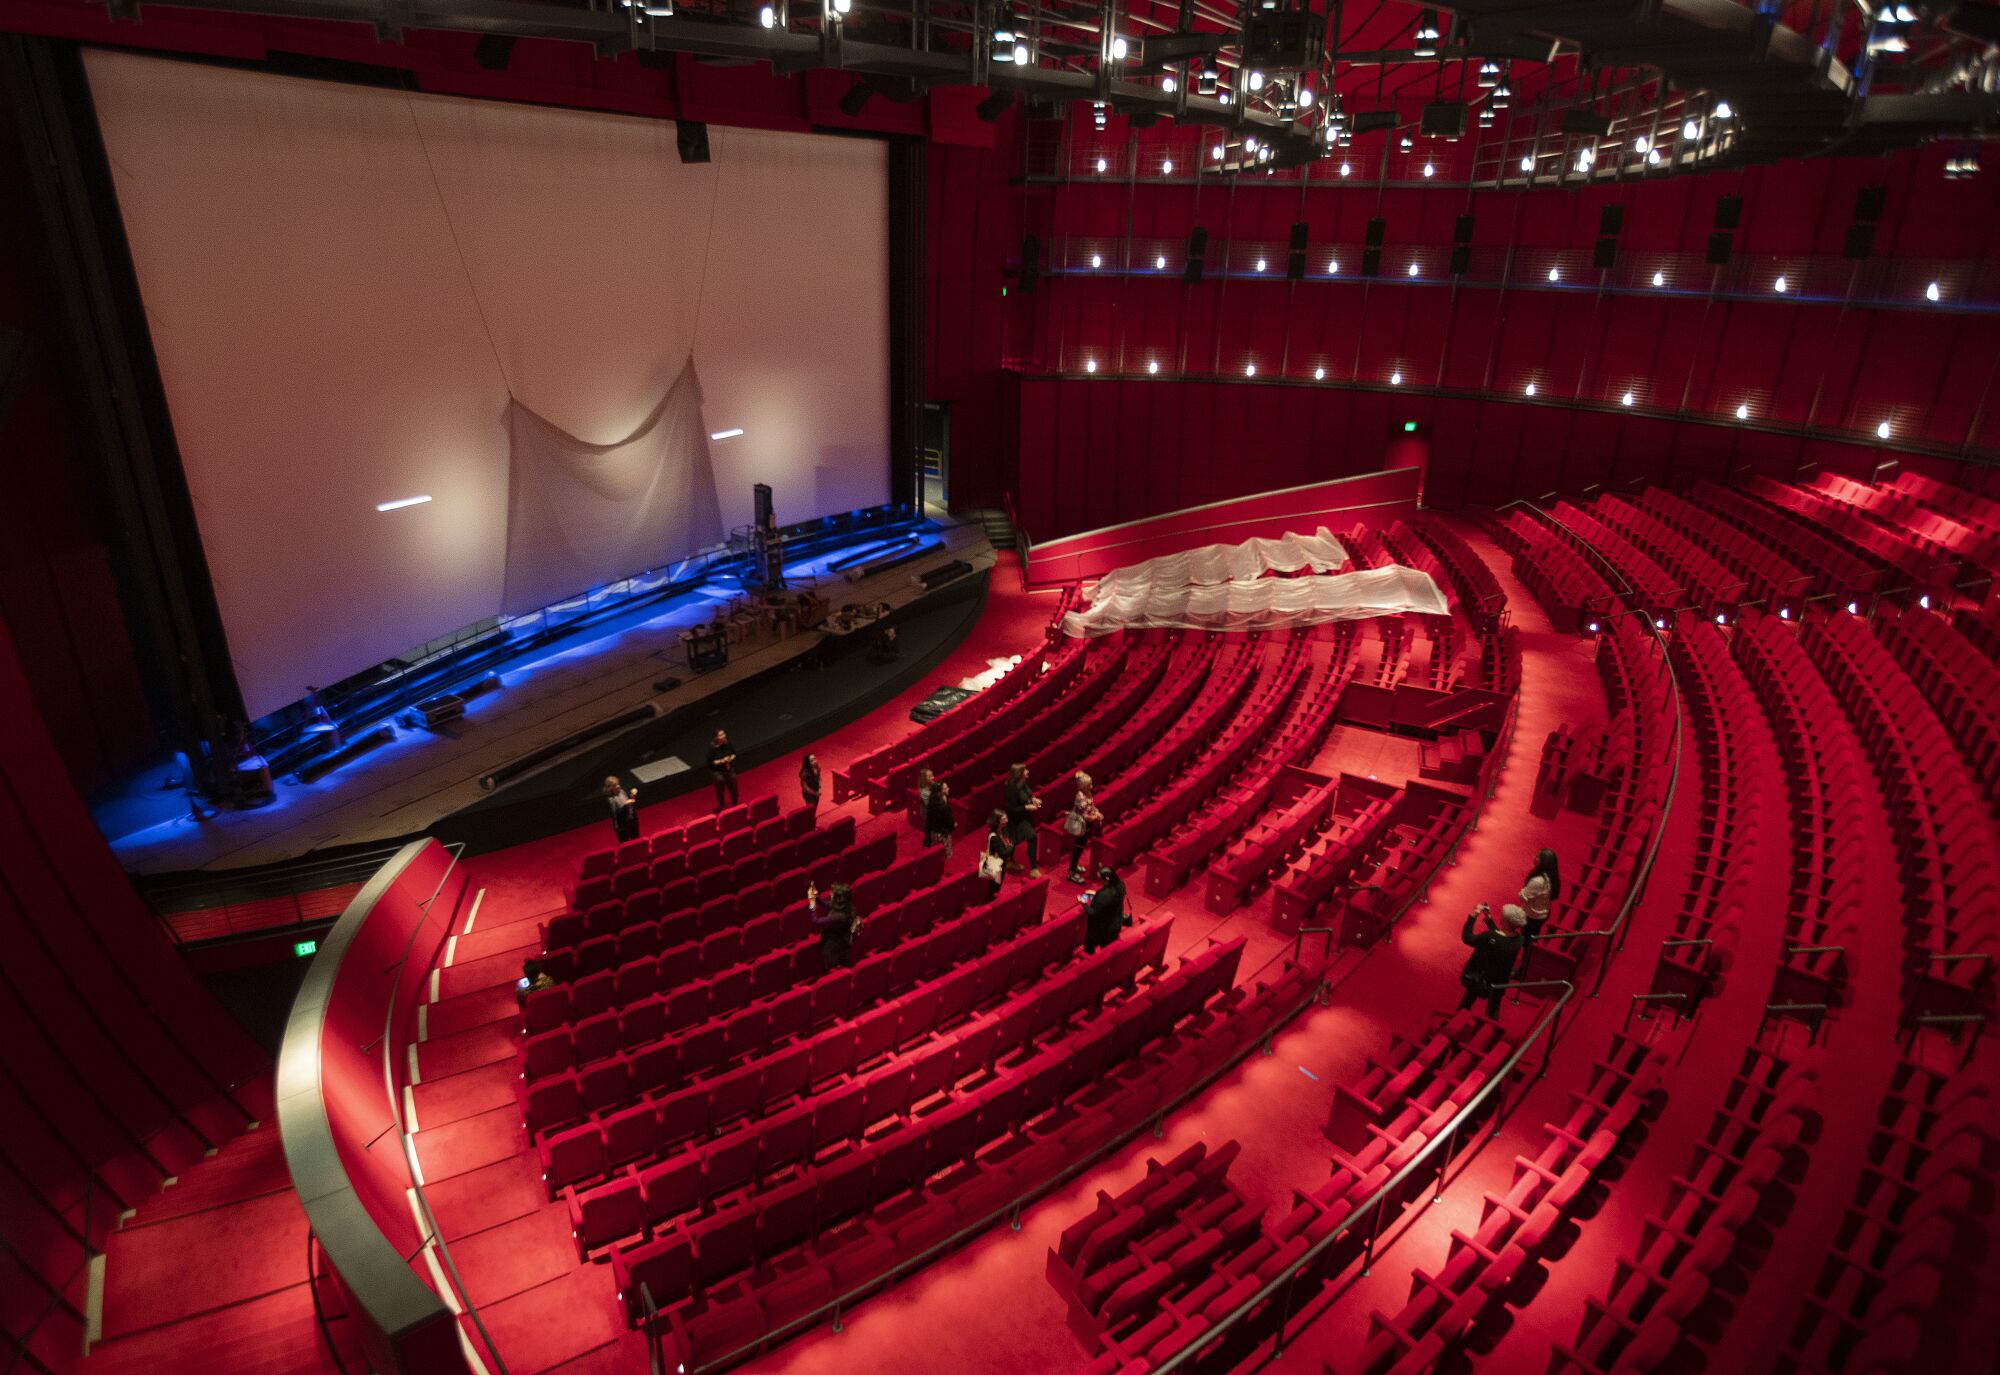 The red interiors of the Geffen theater are seen from inside and from above, revealing the curving lines of the building